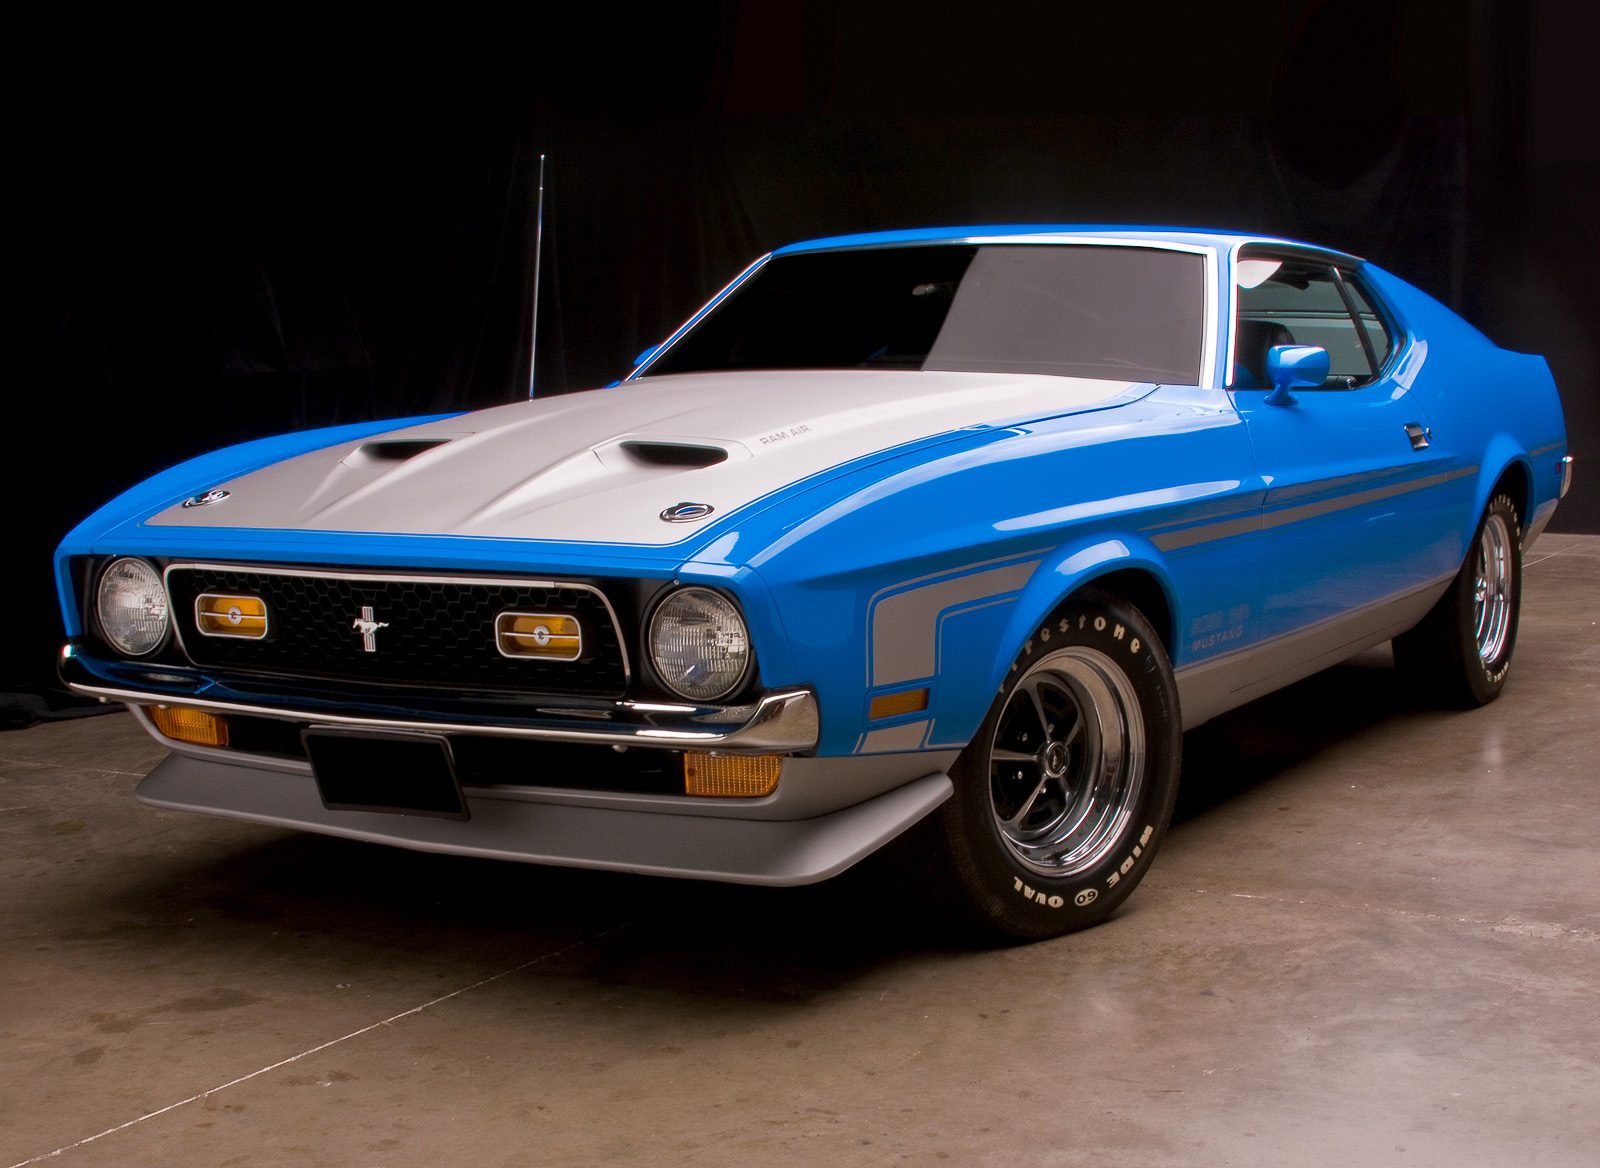 Mustang Of The Day: 1971 Mustang Boss 351